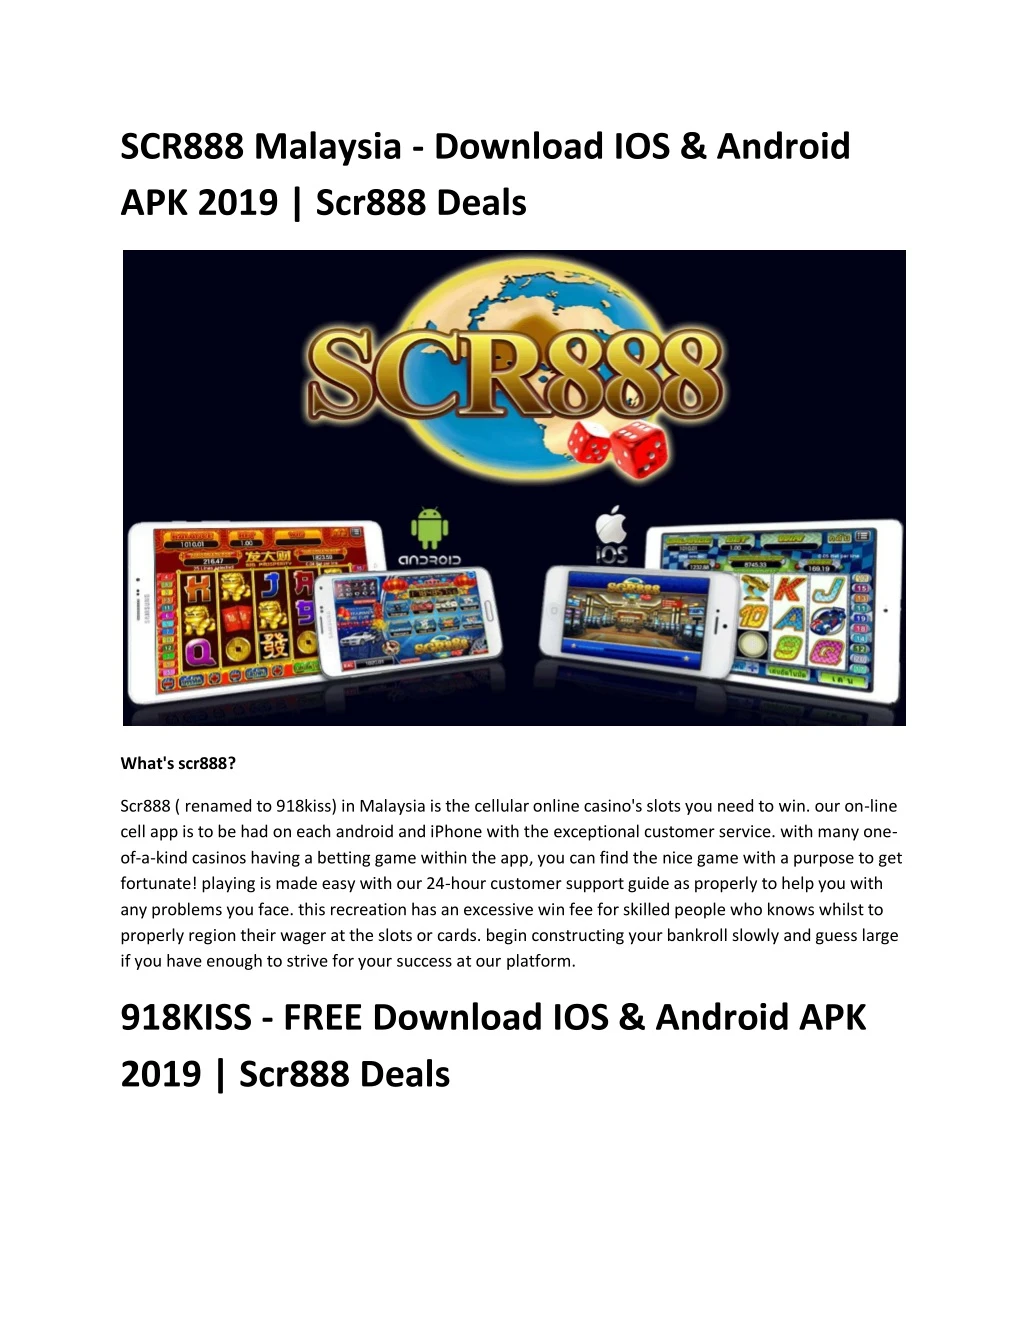 scr888 malaysia download ios android apk 2019